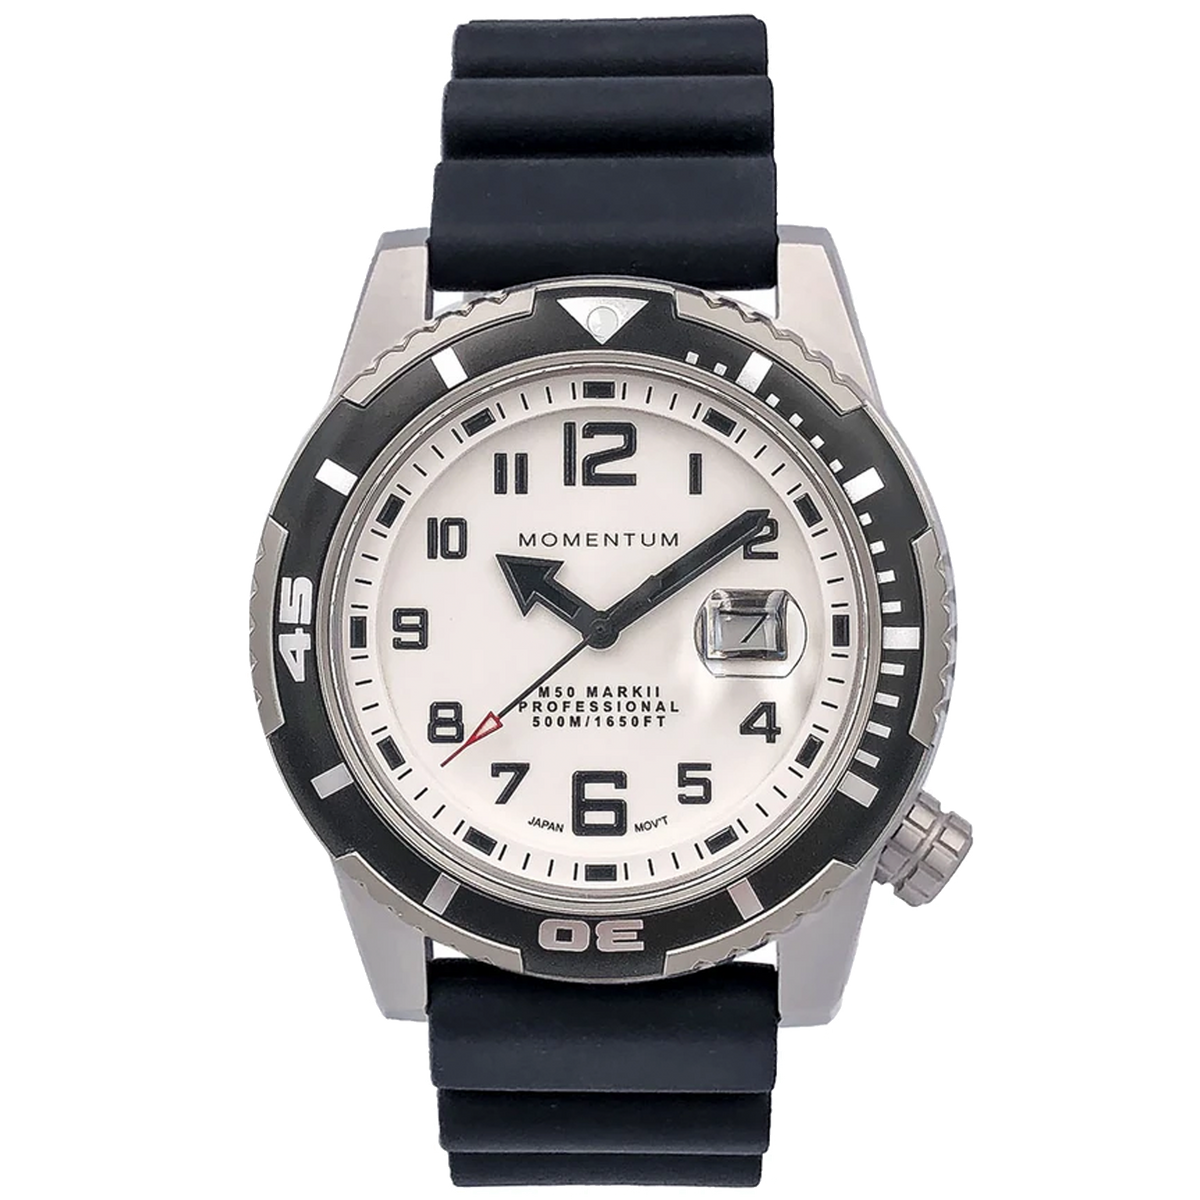 Momentum Watch - M50 Military Dive - White Dial